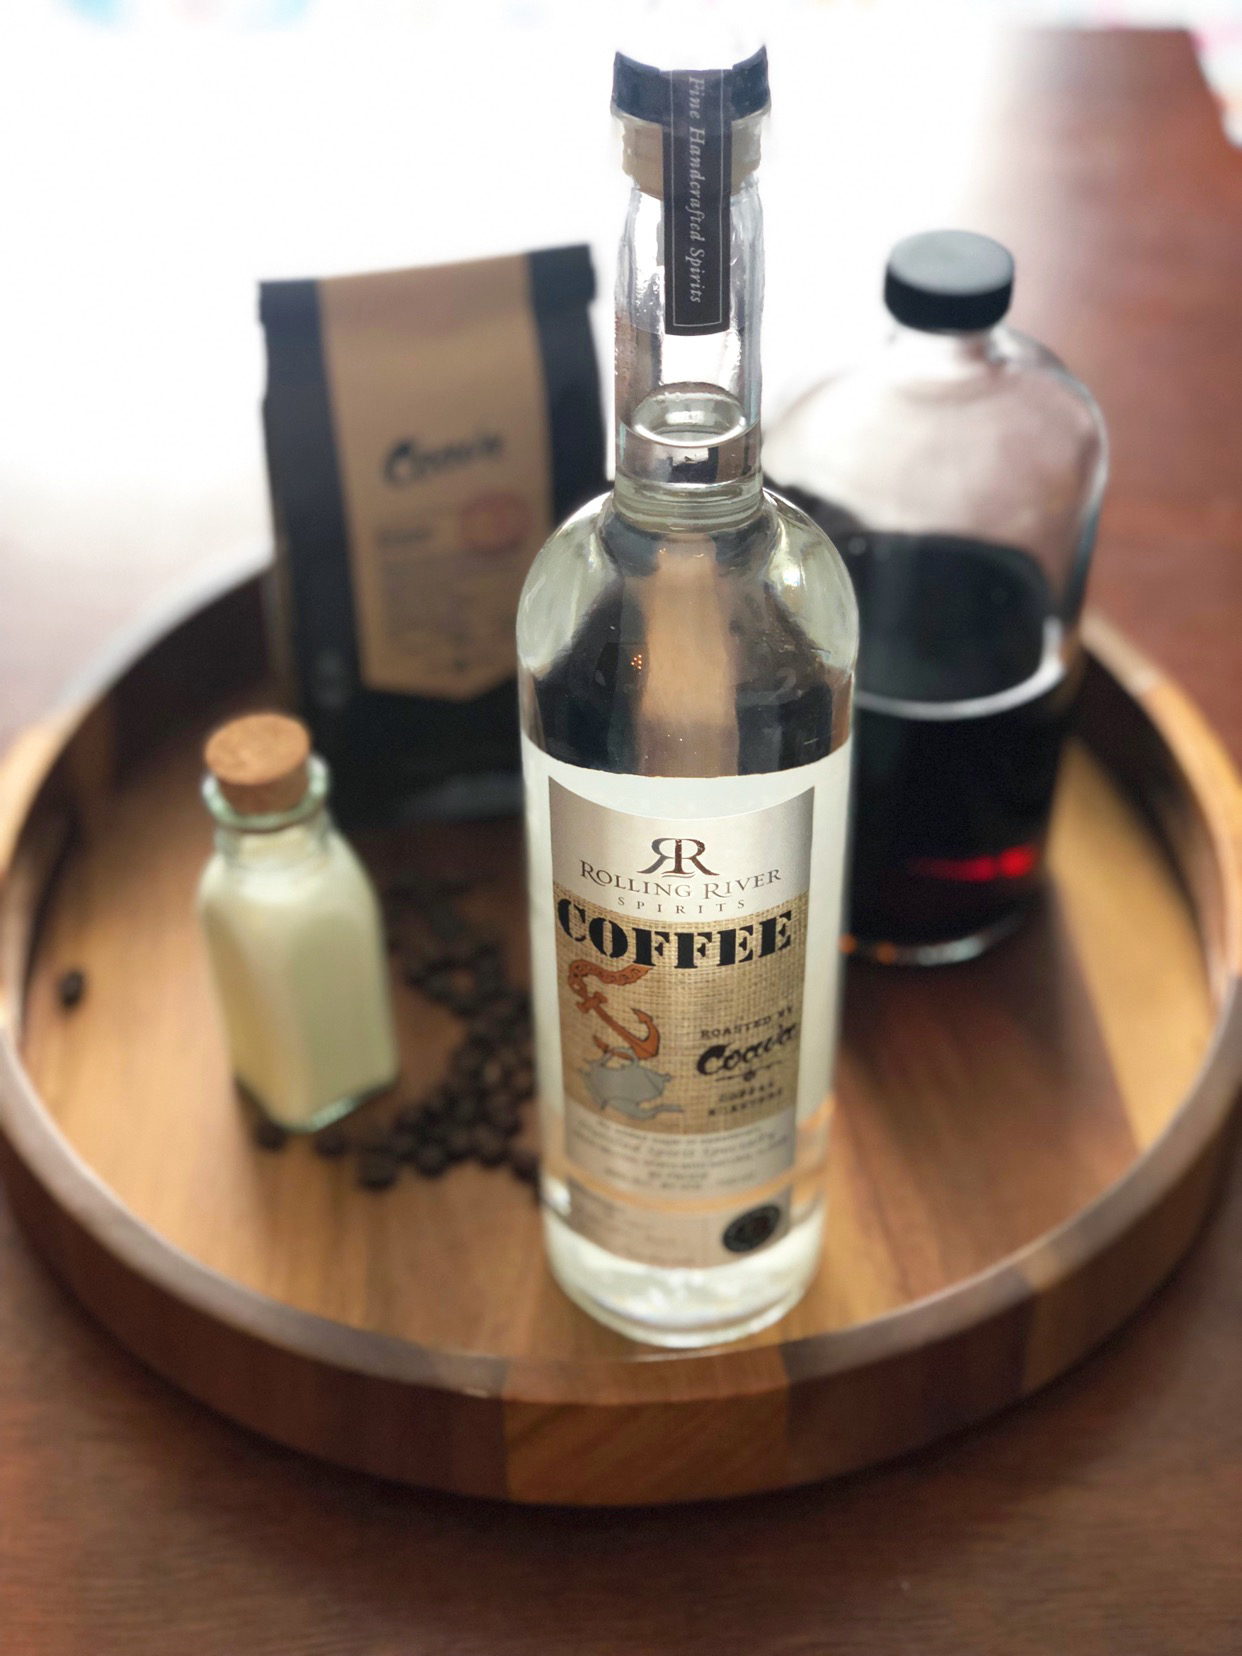 Ingredients for a great coffee cocktail